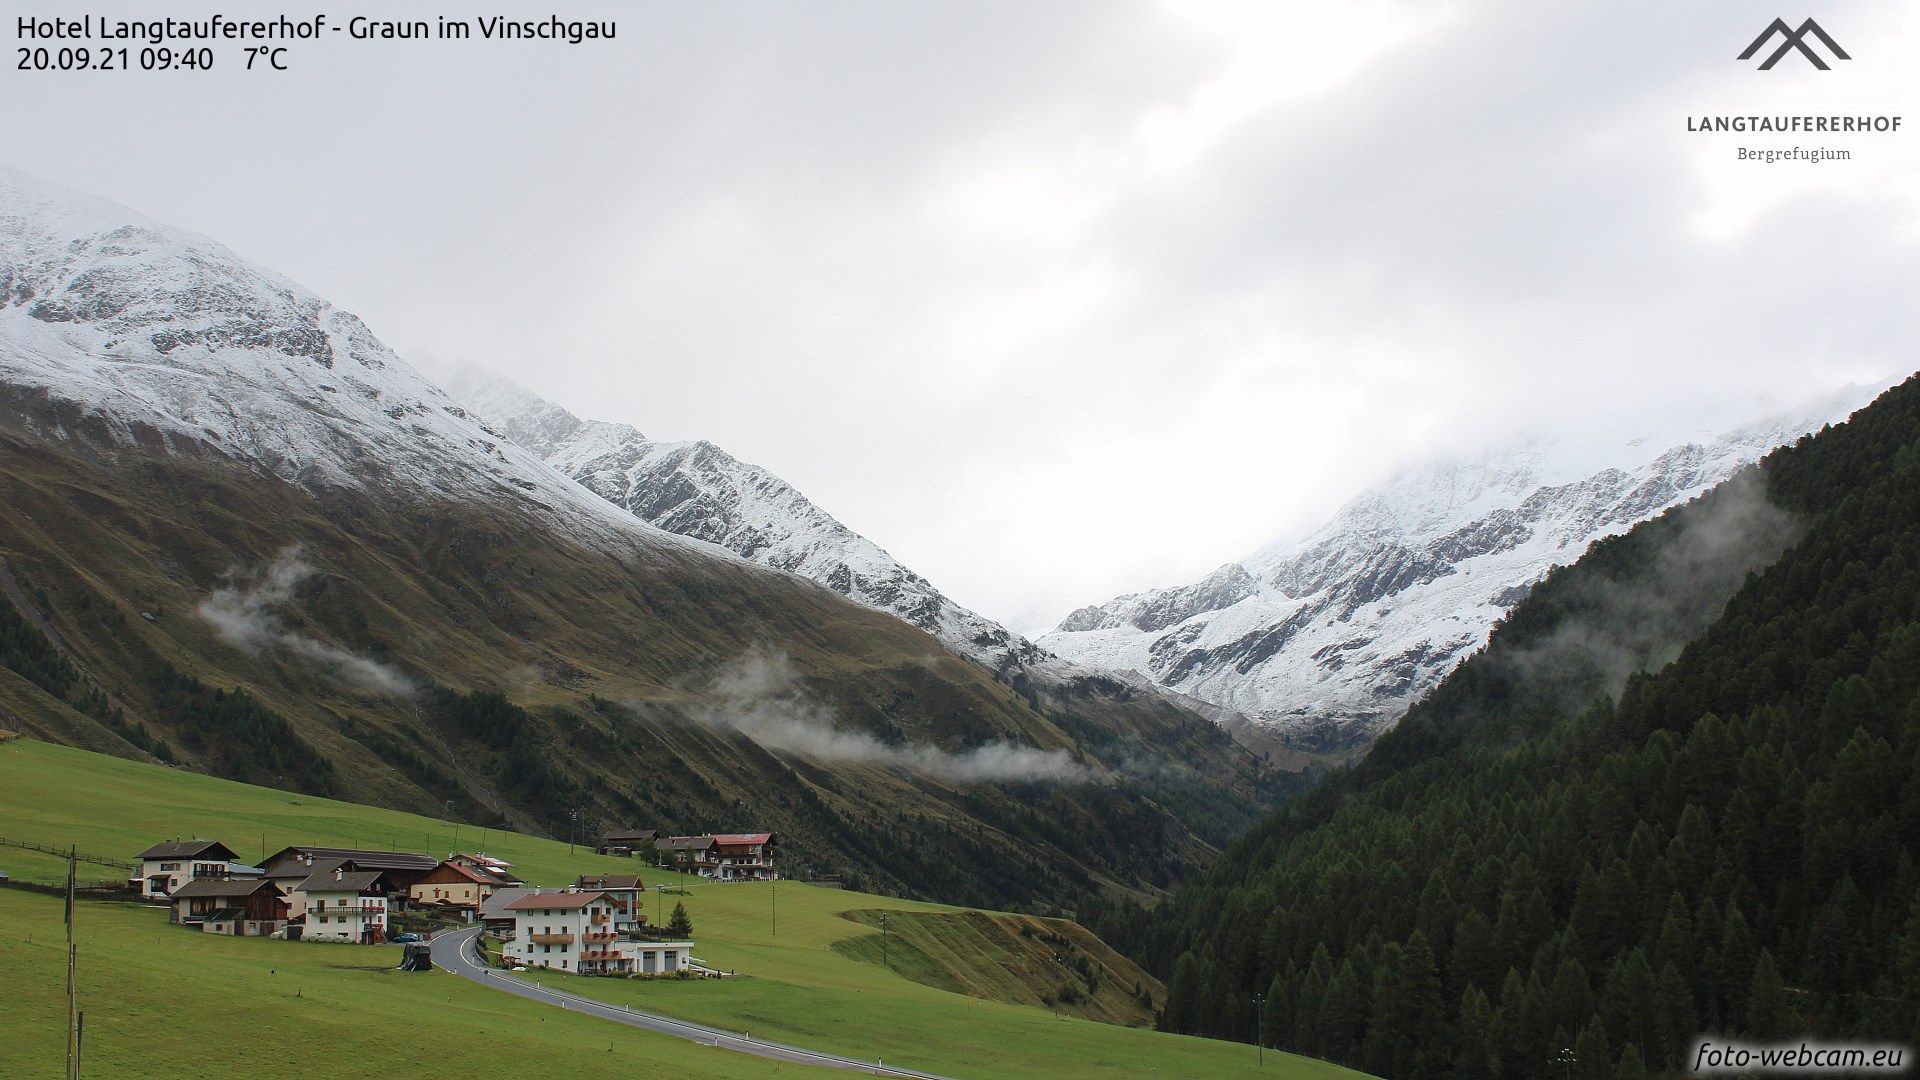 Around the main alpine ridge the snow line is quite high, as here in the Langtaufertal (Italy)